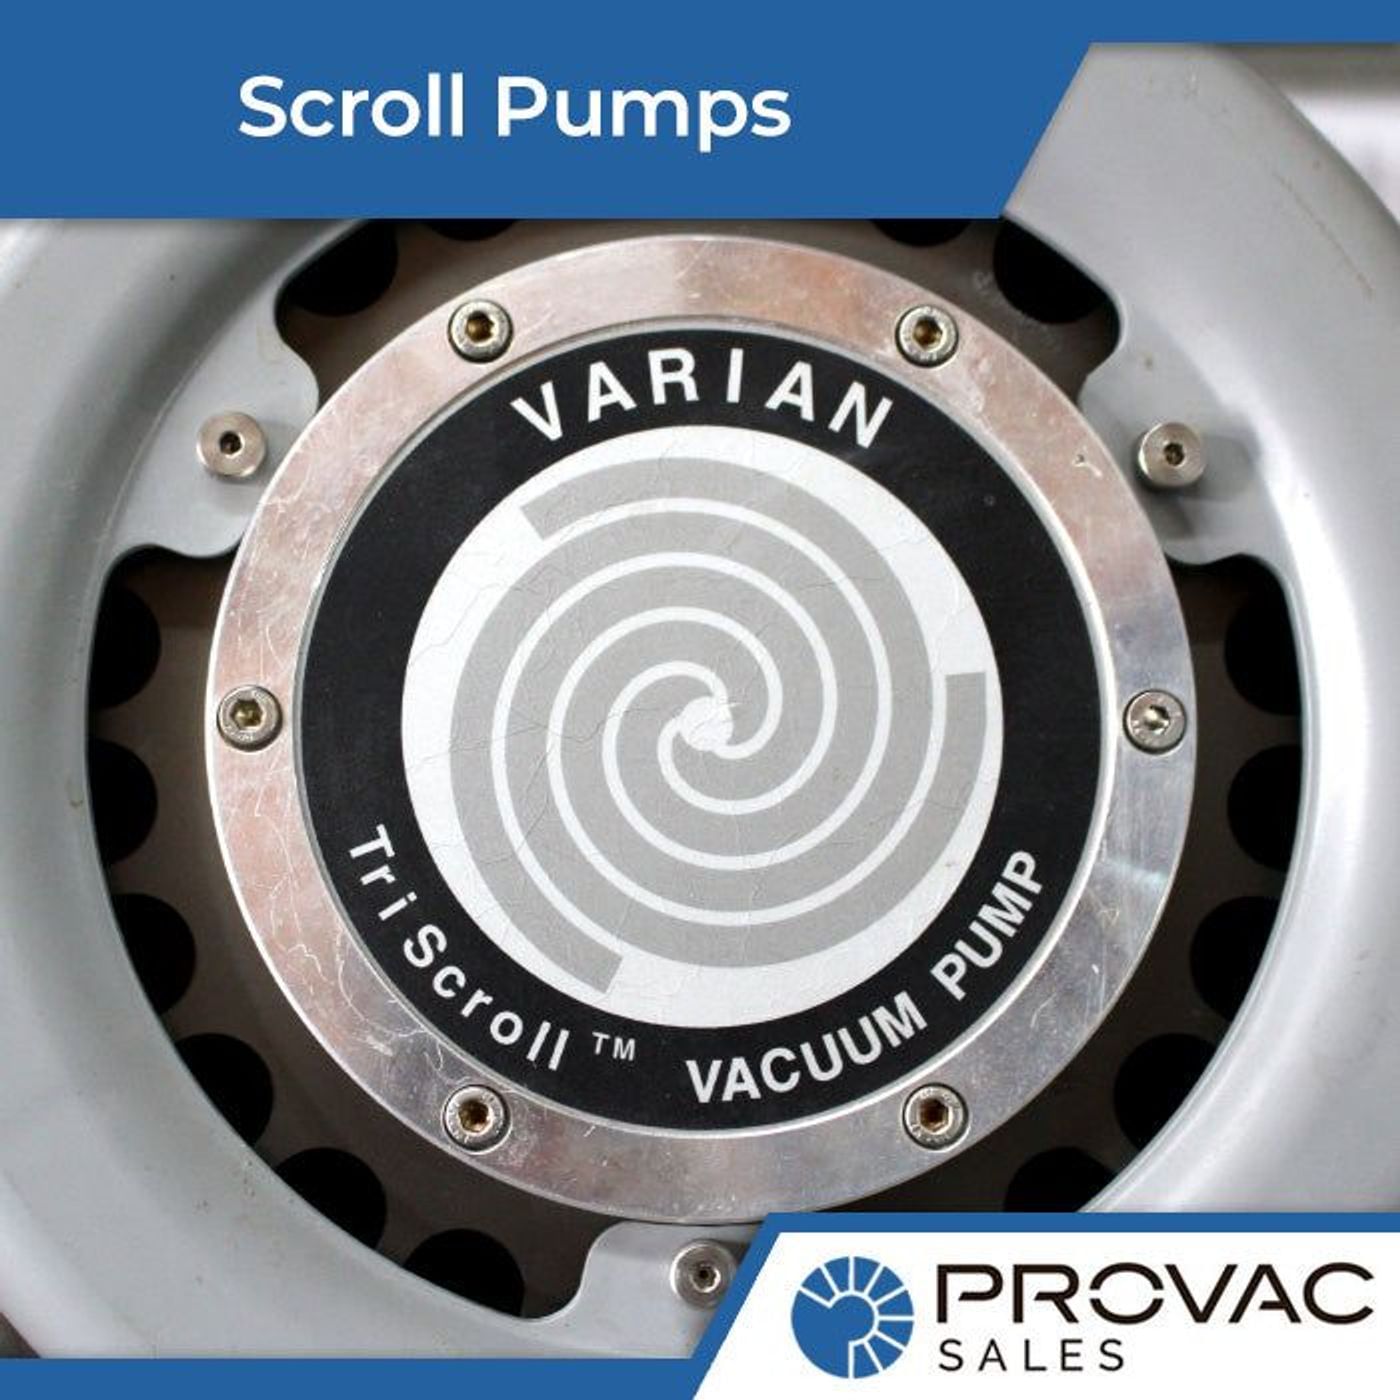 Scroll Vacuum Pumps - Introduction & Guide